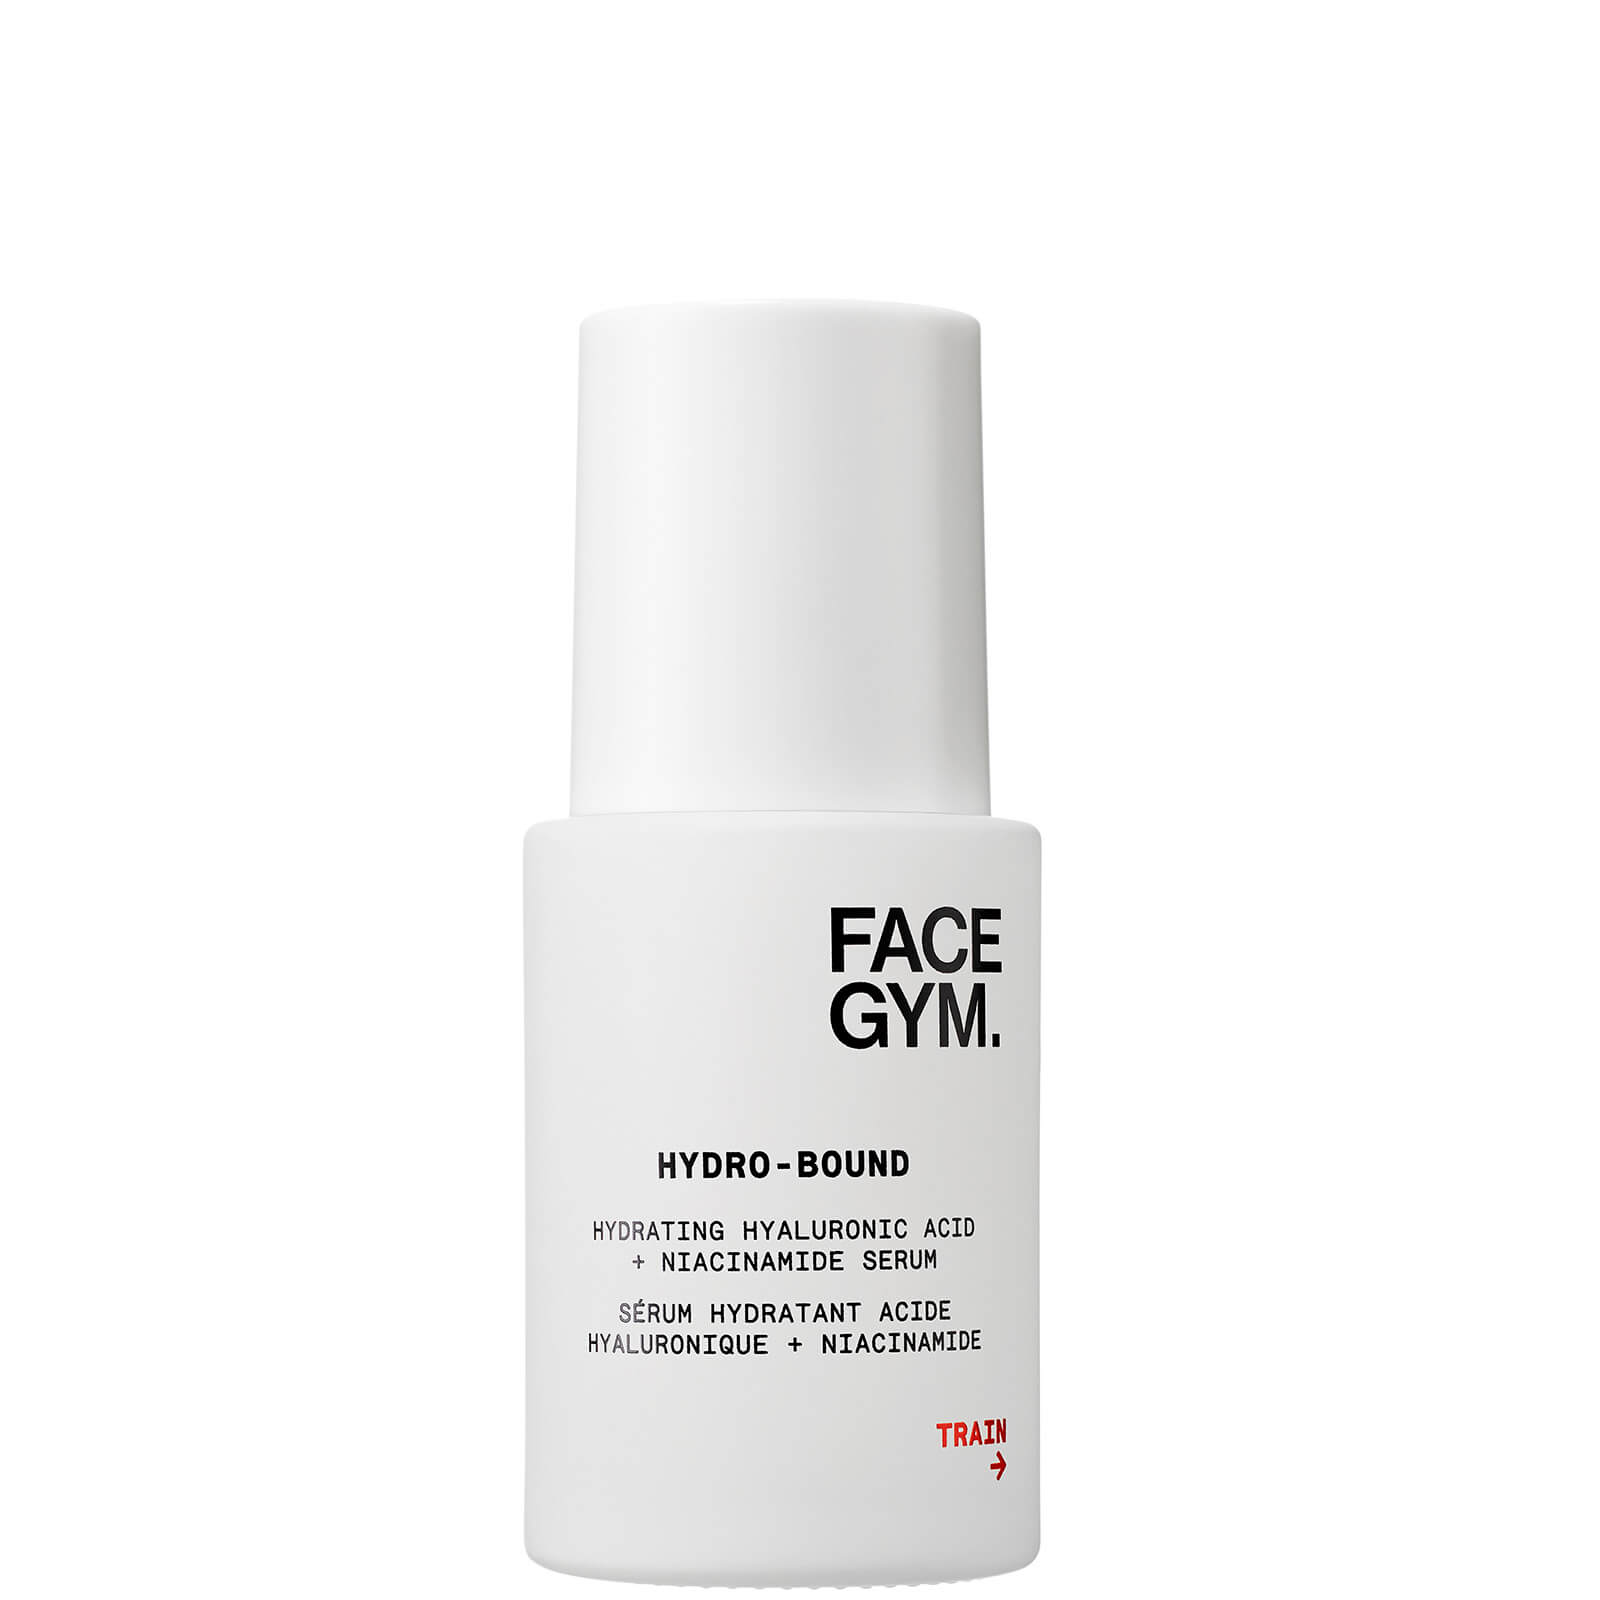 Image of FaceGym Hydro-bound Hydrating Hyaluronic Acid and Niacinamide Serum (Various Sizes) - 30ml